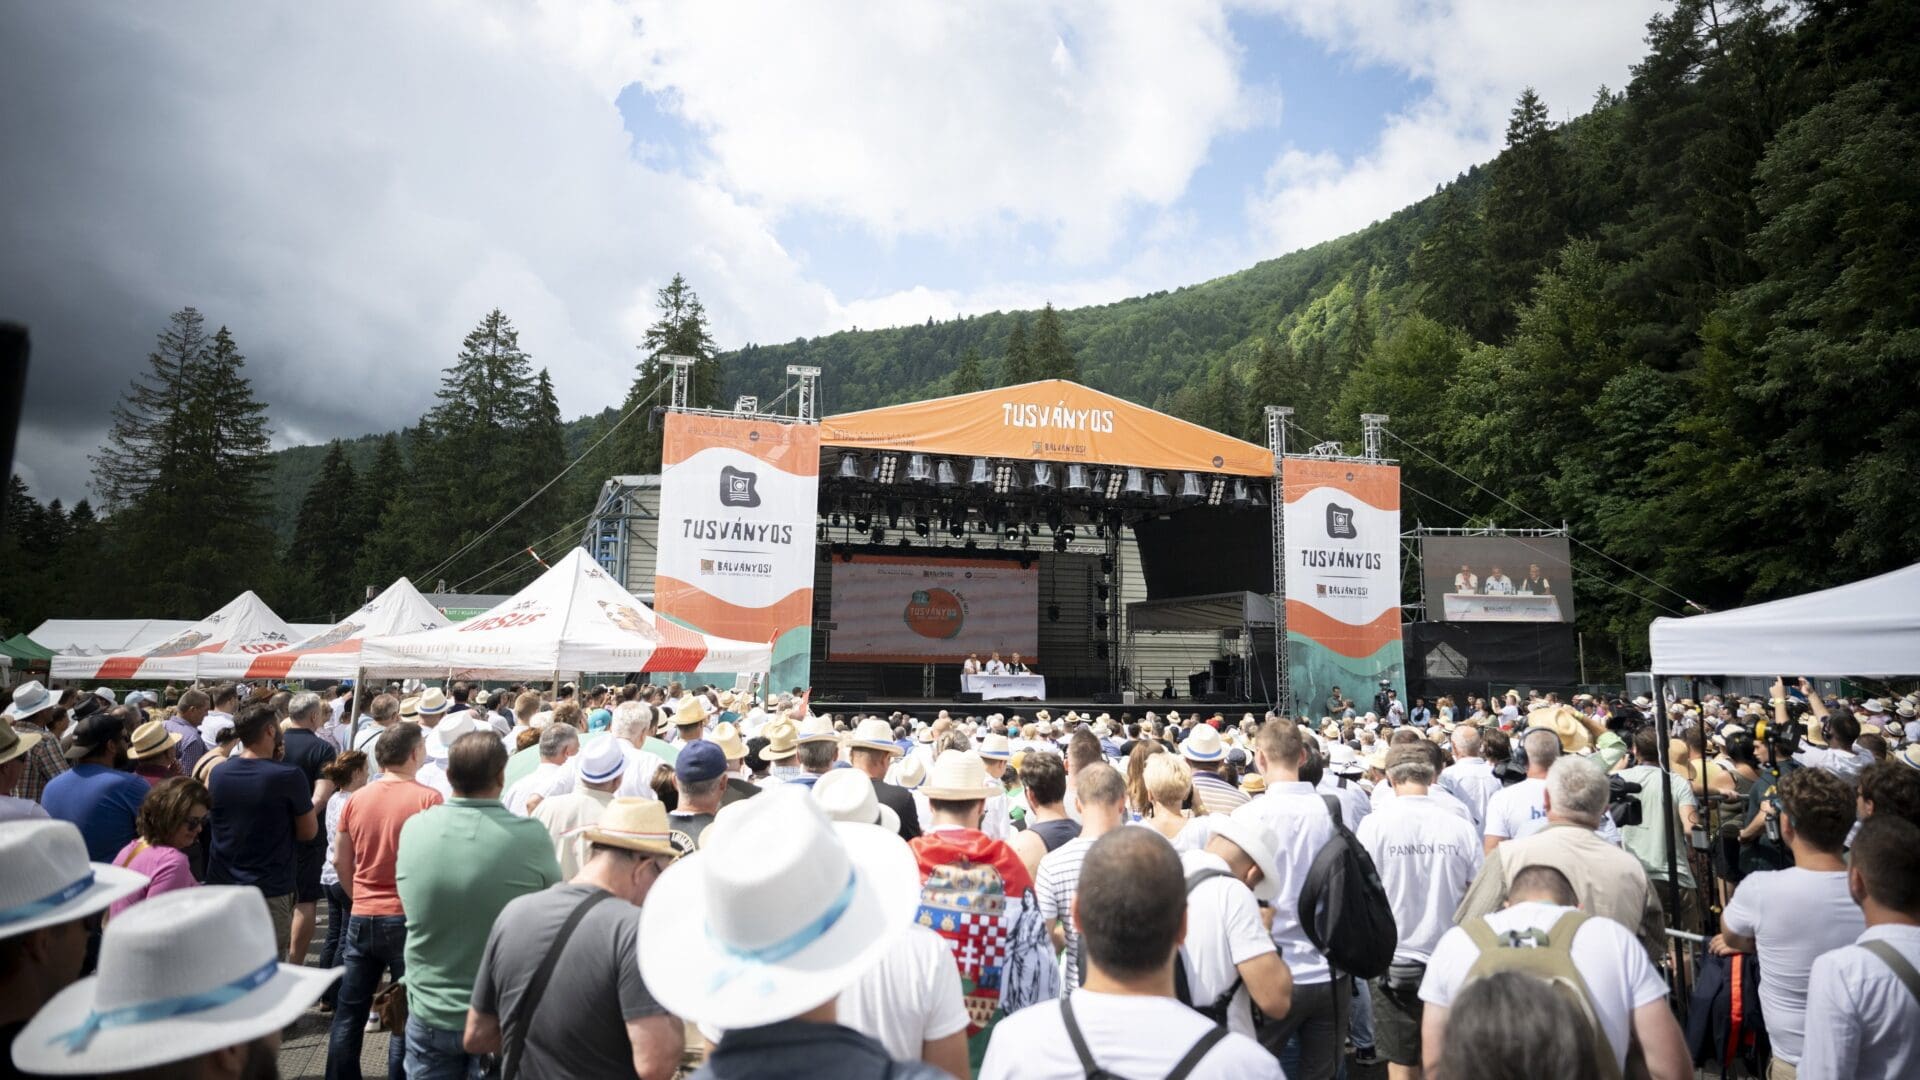 The adience listens to Viktor Orbán delivering his remarks at the 32nd Tusványos Festival on 22 July 2023.